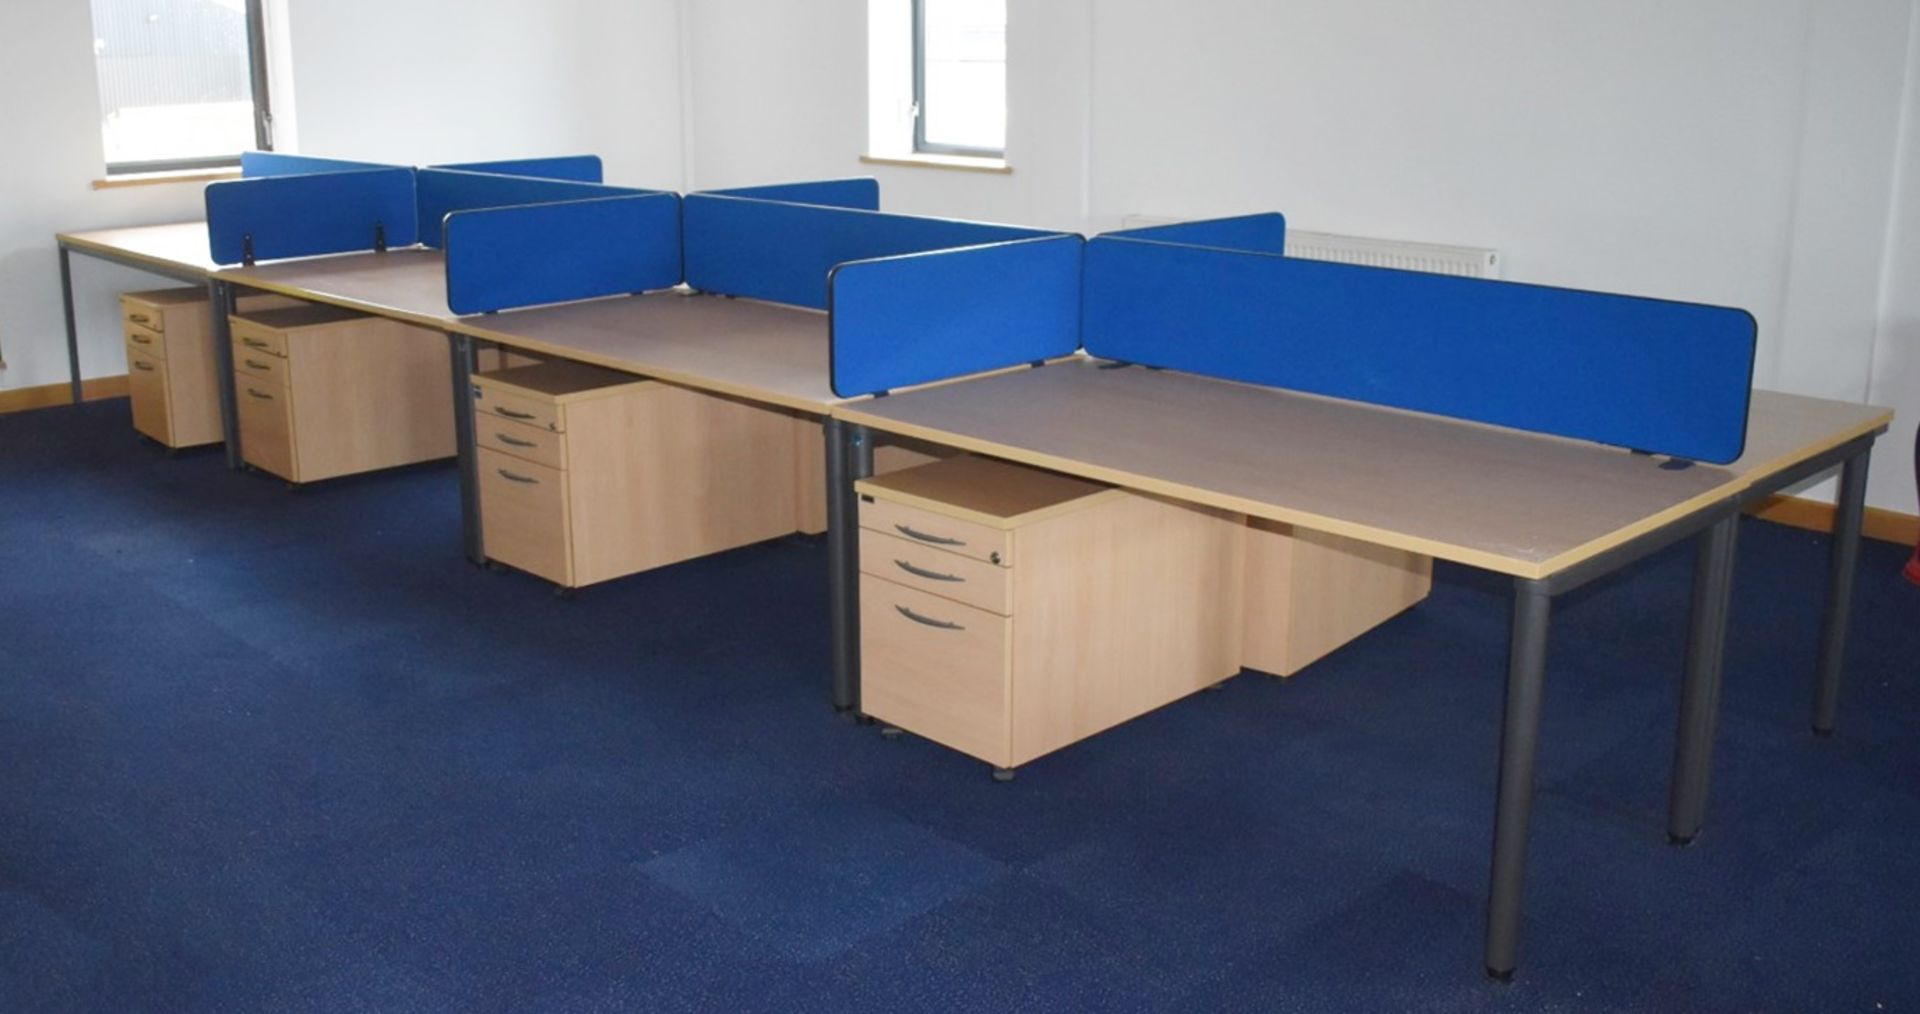 8 x Beech Office Desks With Drawer Pedestals and Privacy Partitions - H72 x W160 x D80 cms - Ref - Image 9 of 11